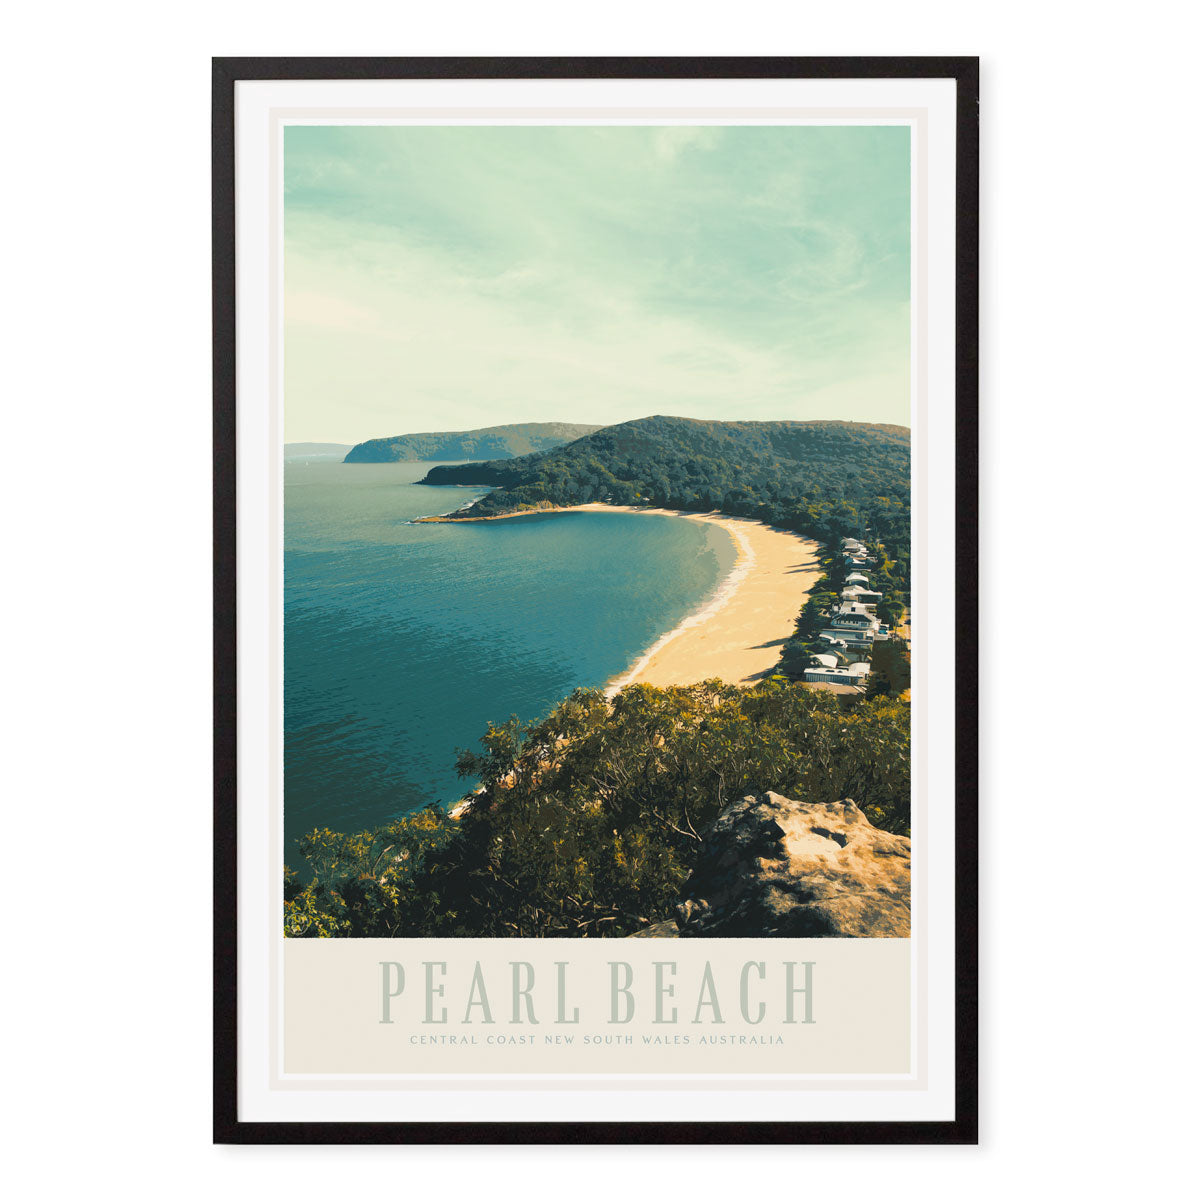 Pearl beach vintage travel poster central coast in black frame by places we luv